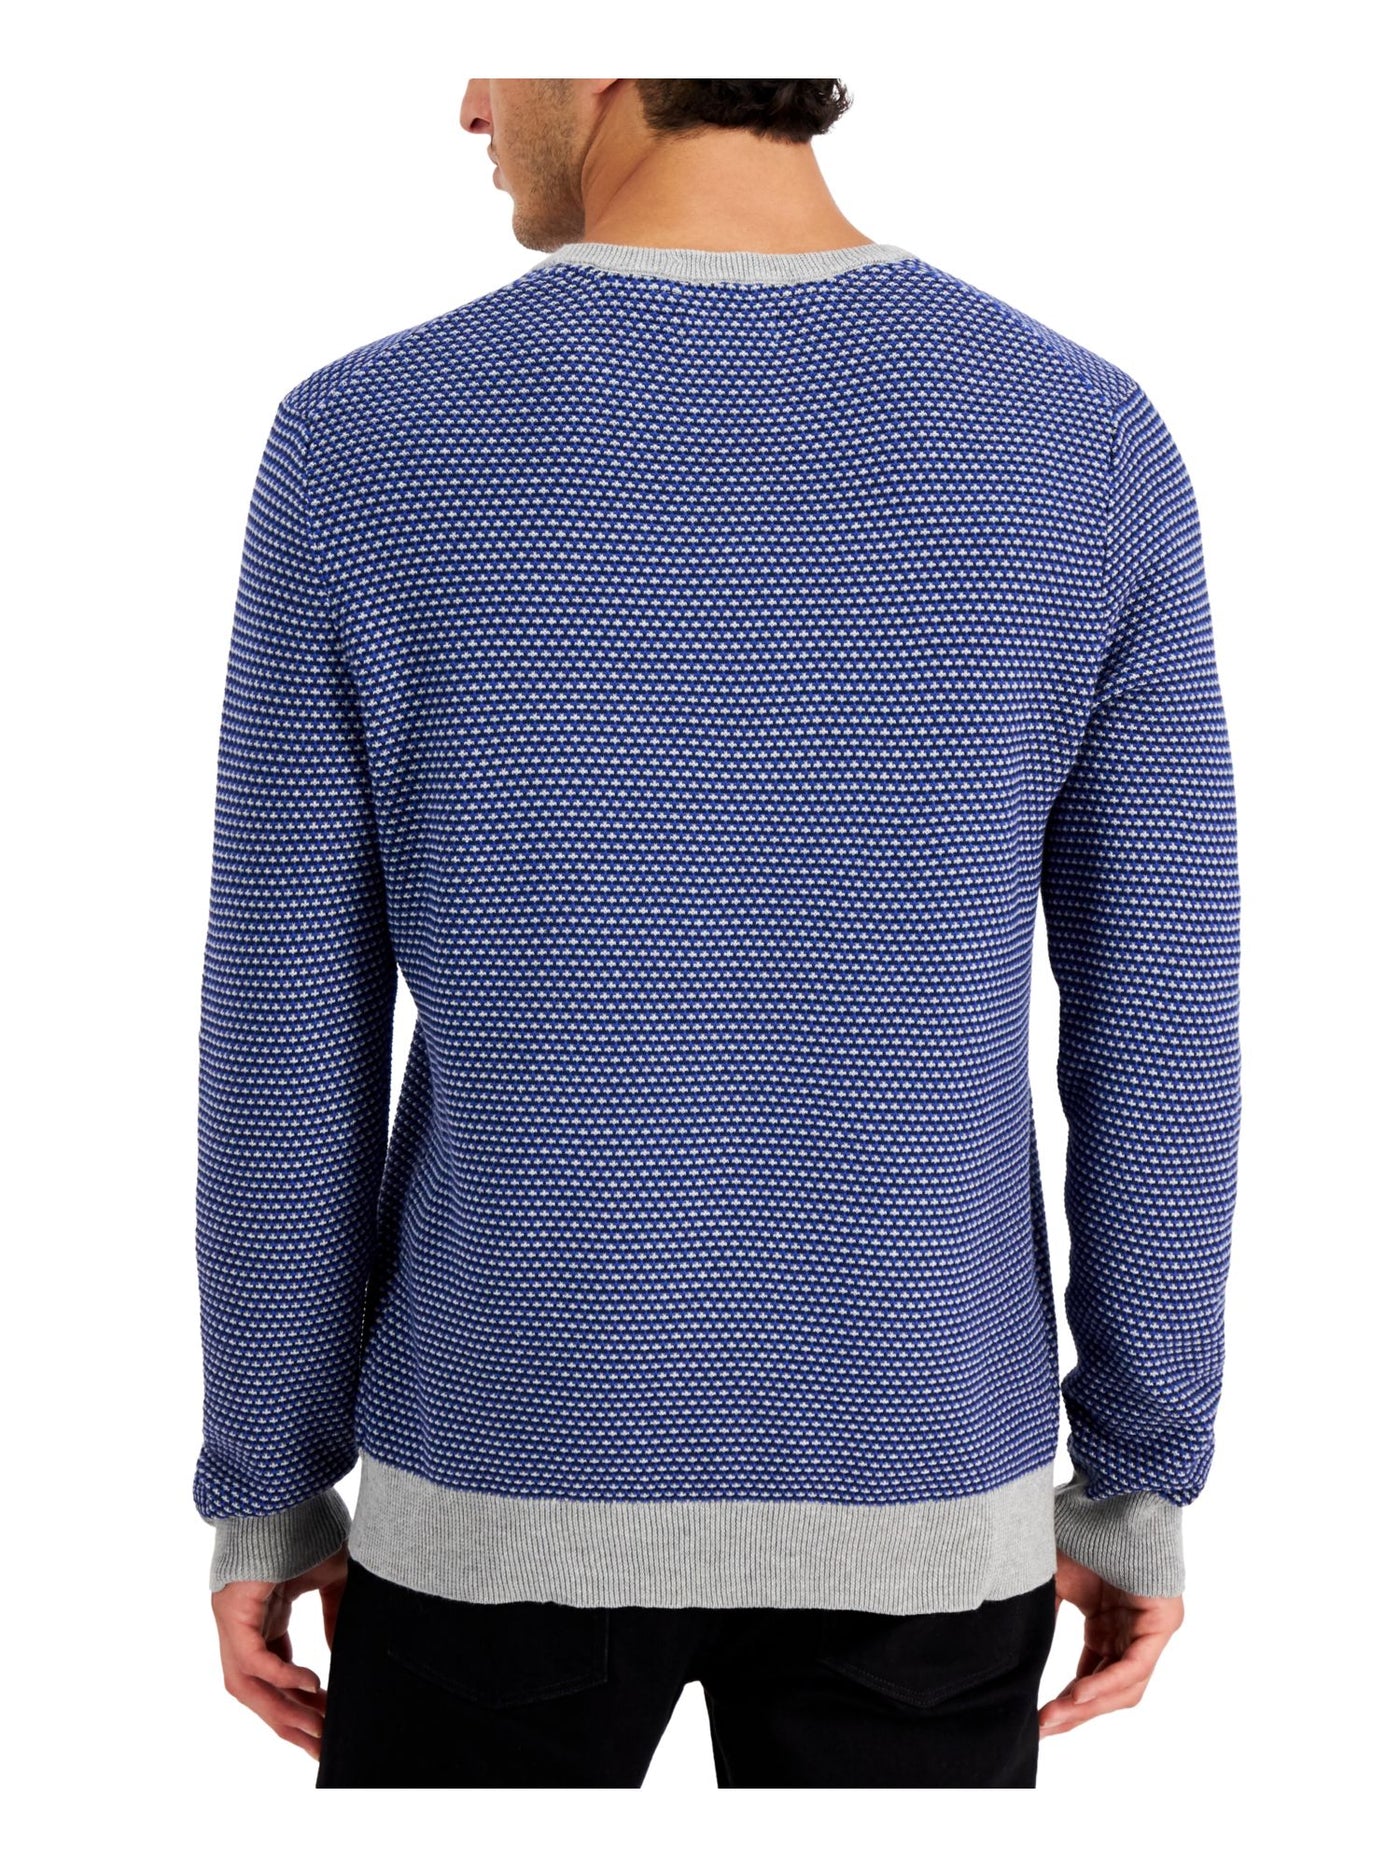 CLUBROOM Mens Elevated Navy Patterned Crew Neck Classic Fit Knit Pullover Sweater XL